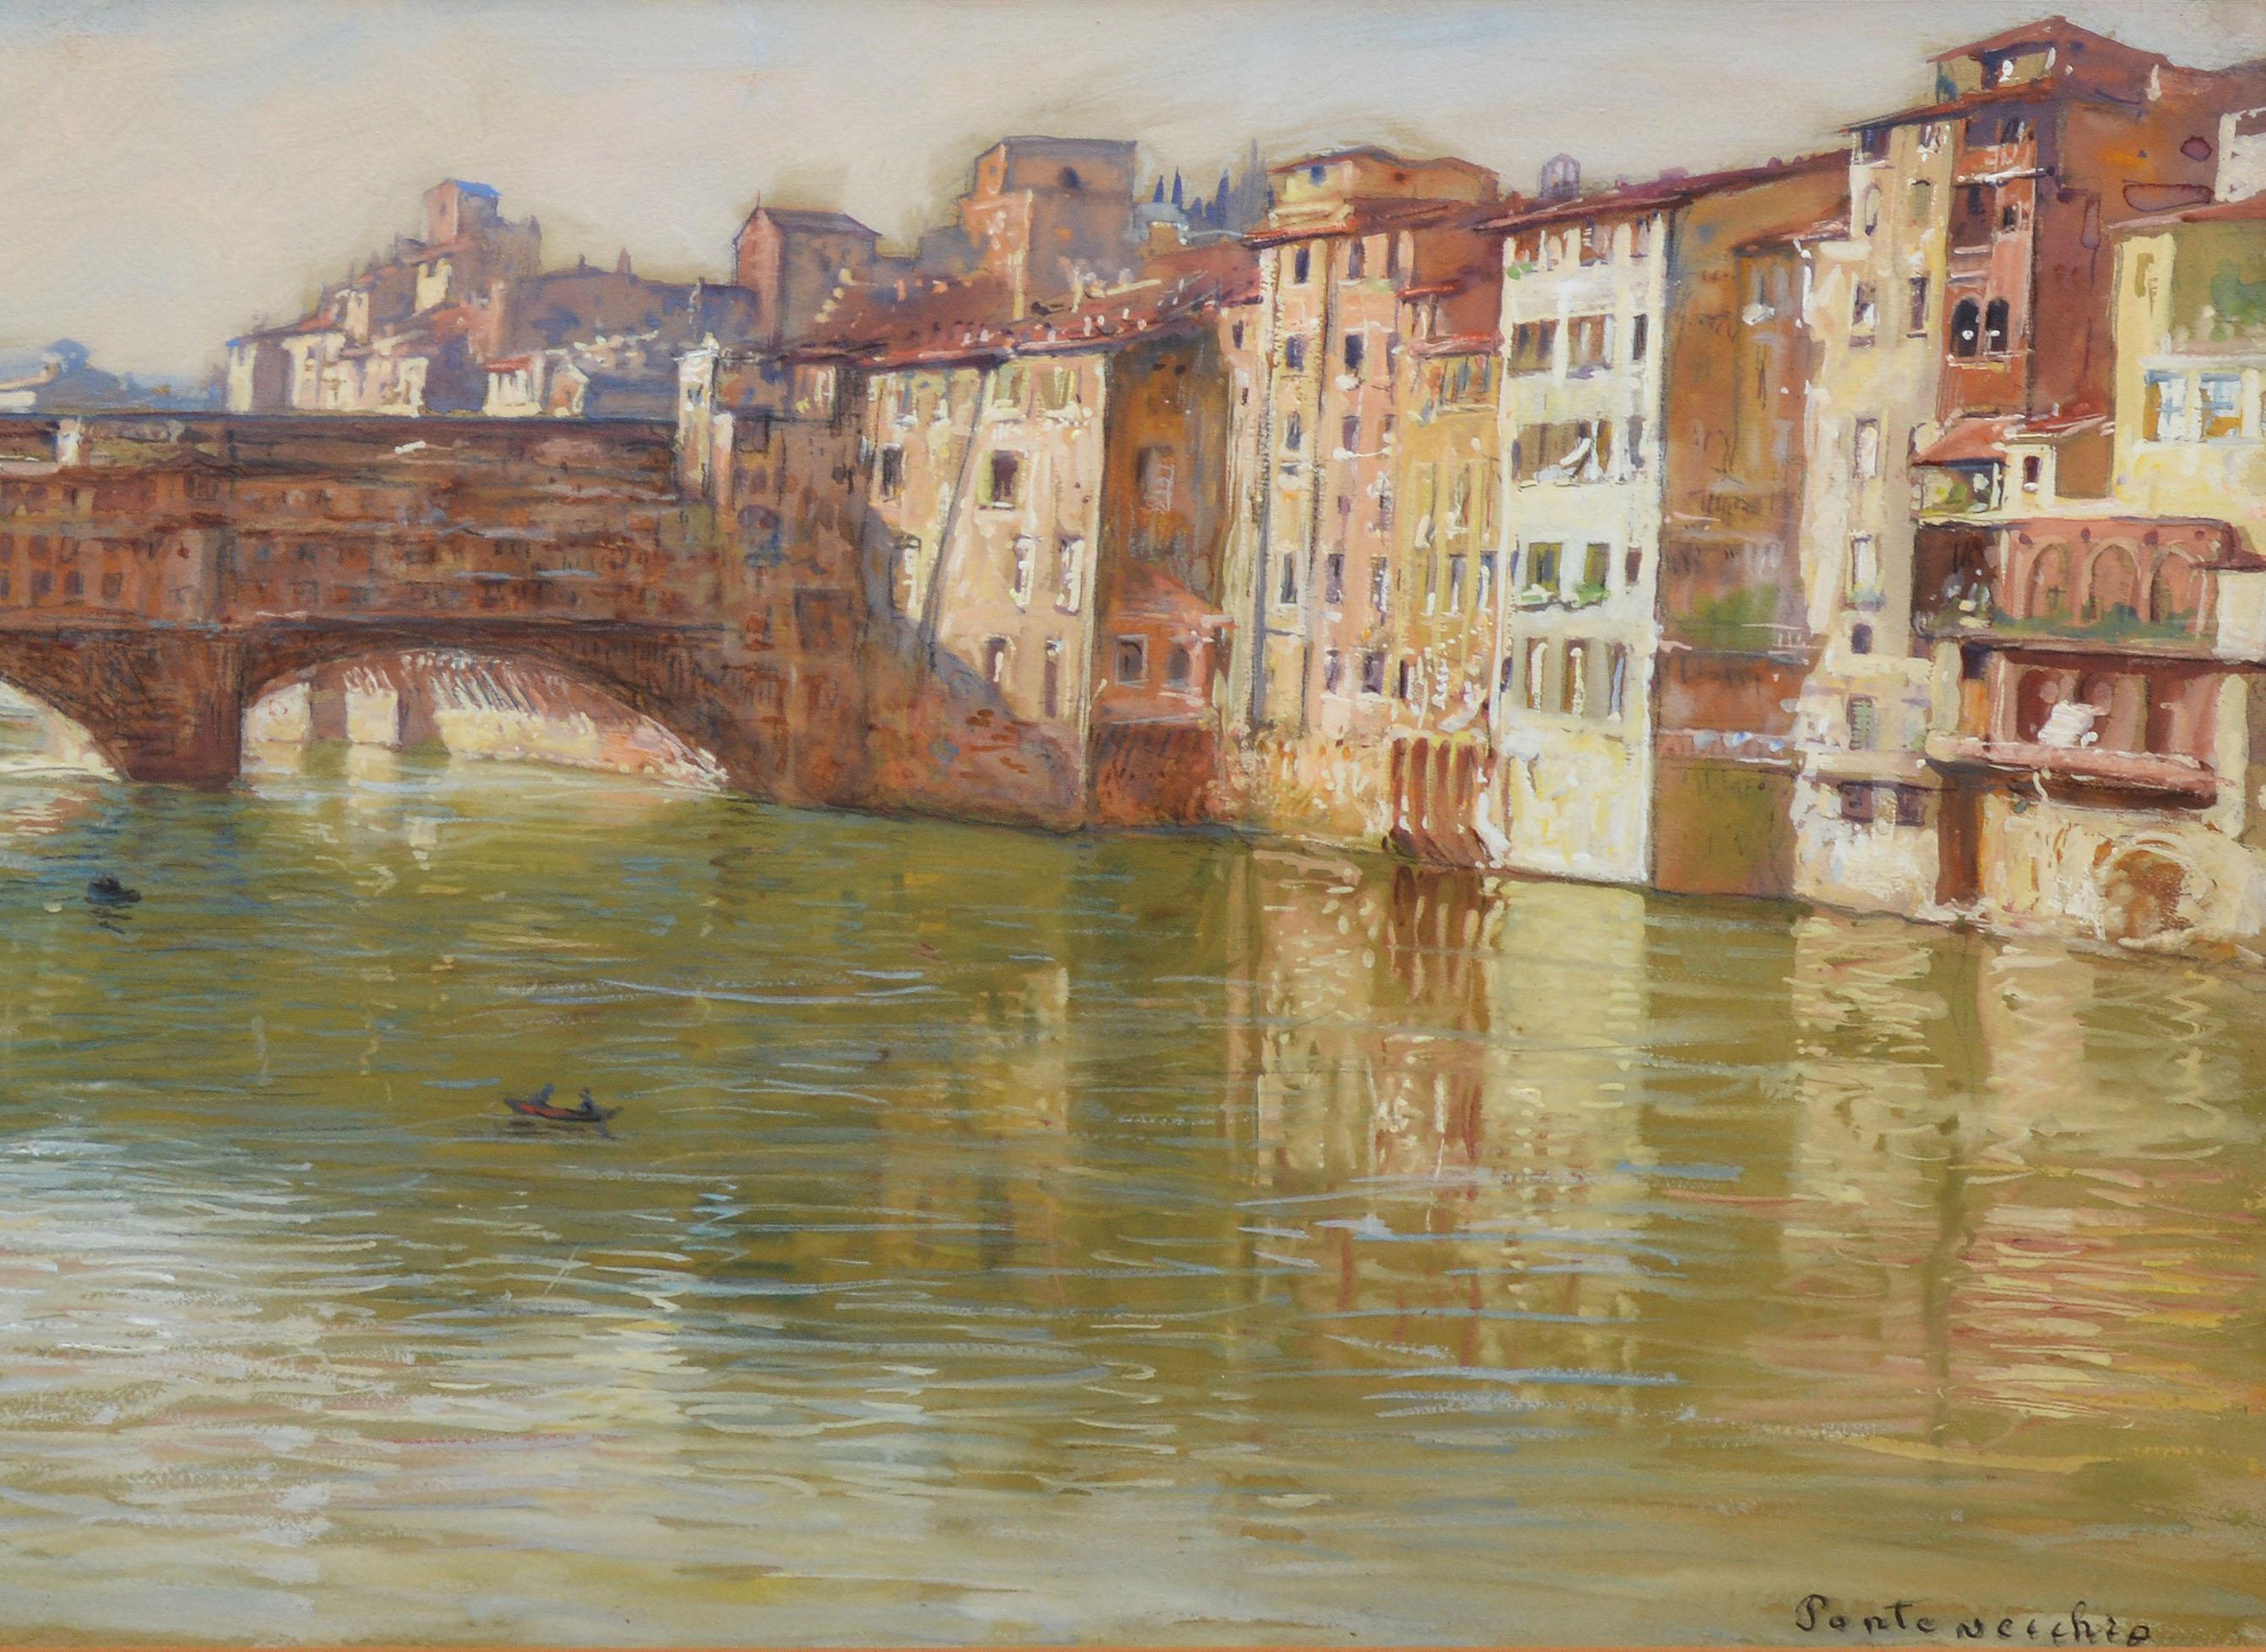 Antique impressionist view Florence by Max Loose  (born 1869).  Mixed media of oil, watercolor and gouache on paper, circa 1890.  Signed.  Displayed in a period frame.  Image, 19.5